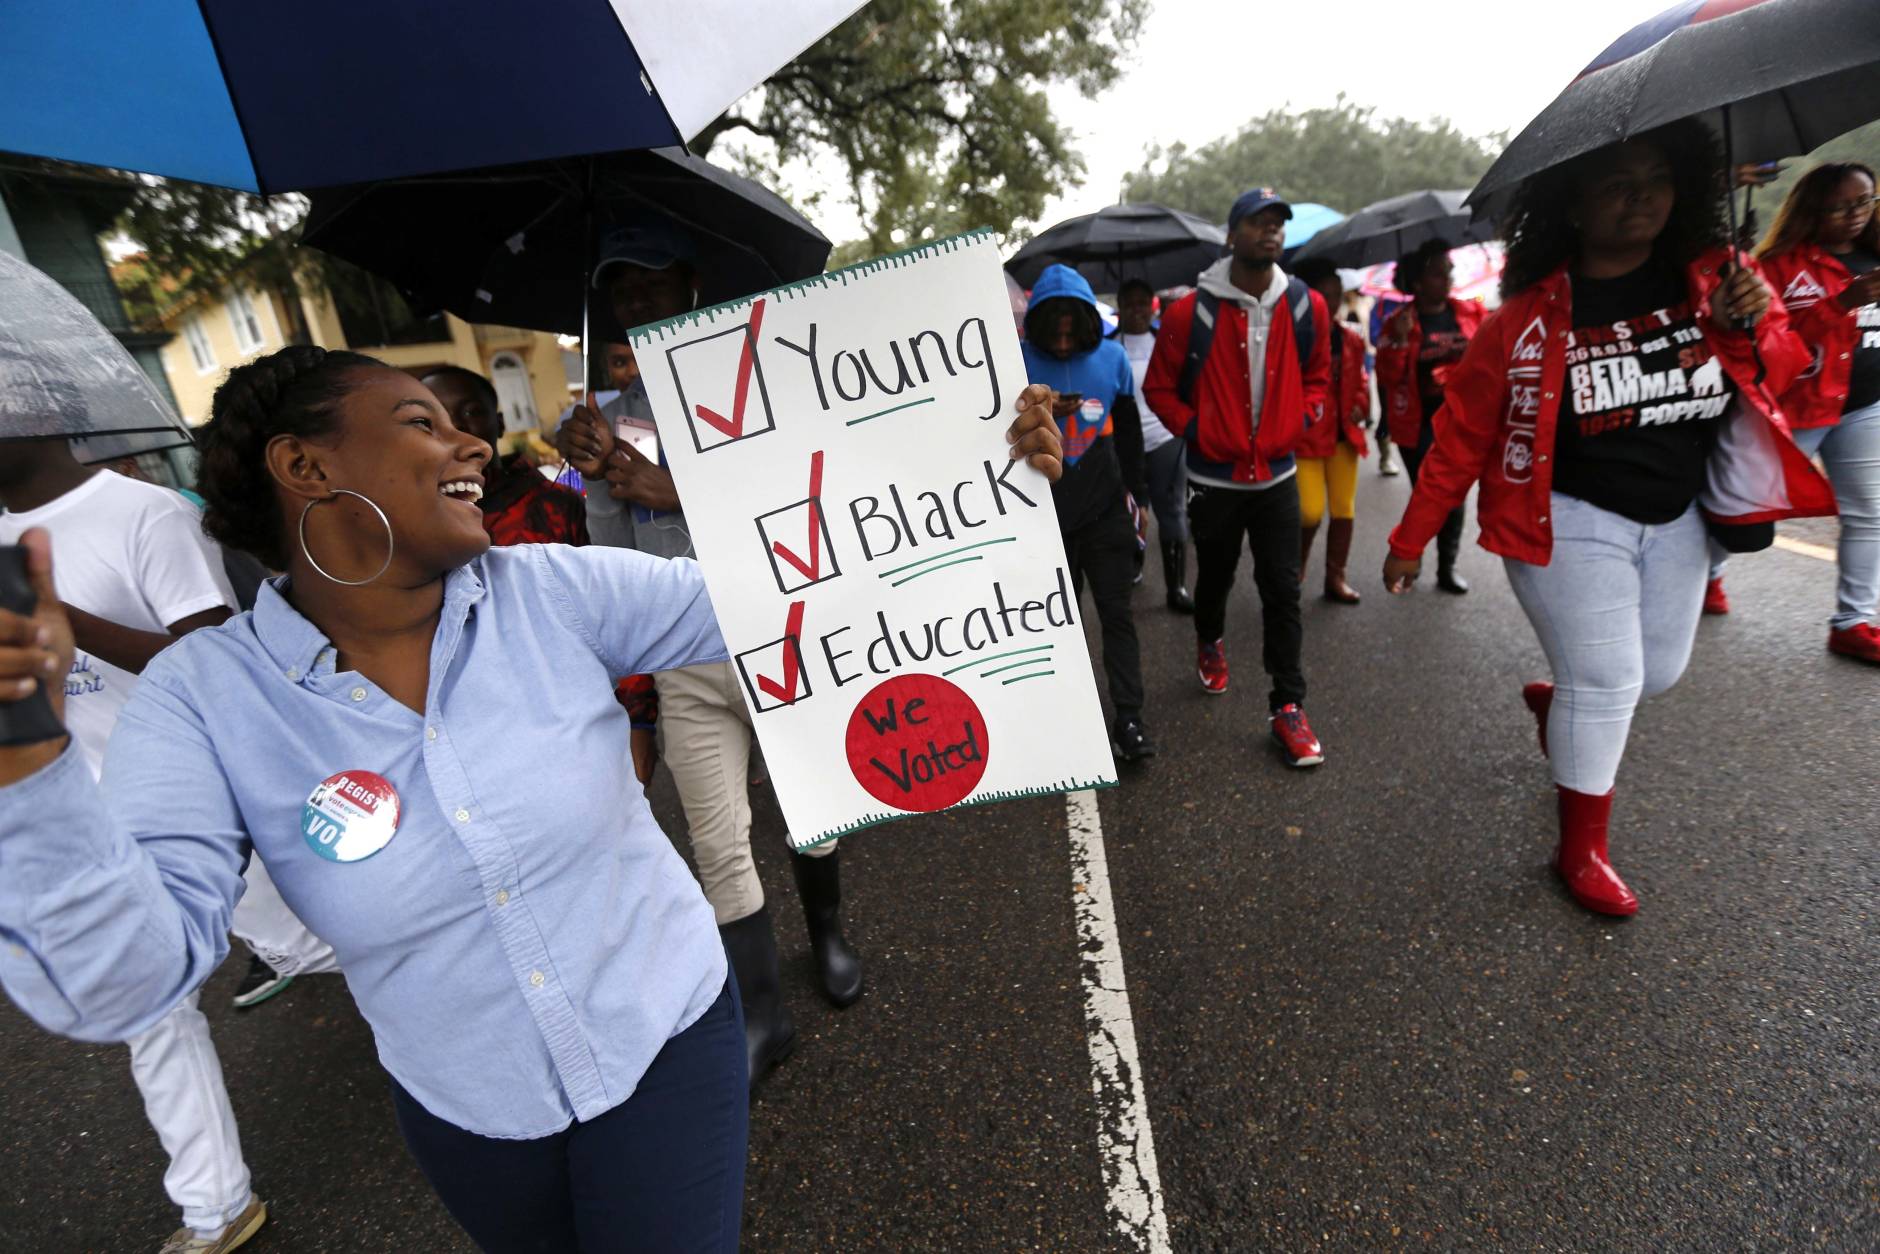 Mariah Hickman, a Dillard University student march in unison with fellow students, to a polling place to vote on election day in New Orleans, Tuesday, Nov. 8, 2016. (AP Photo/Gerald Herbert)